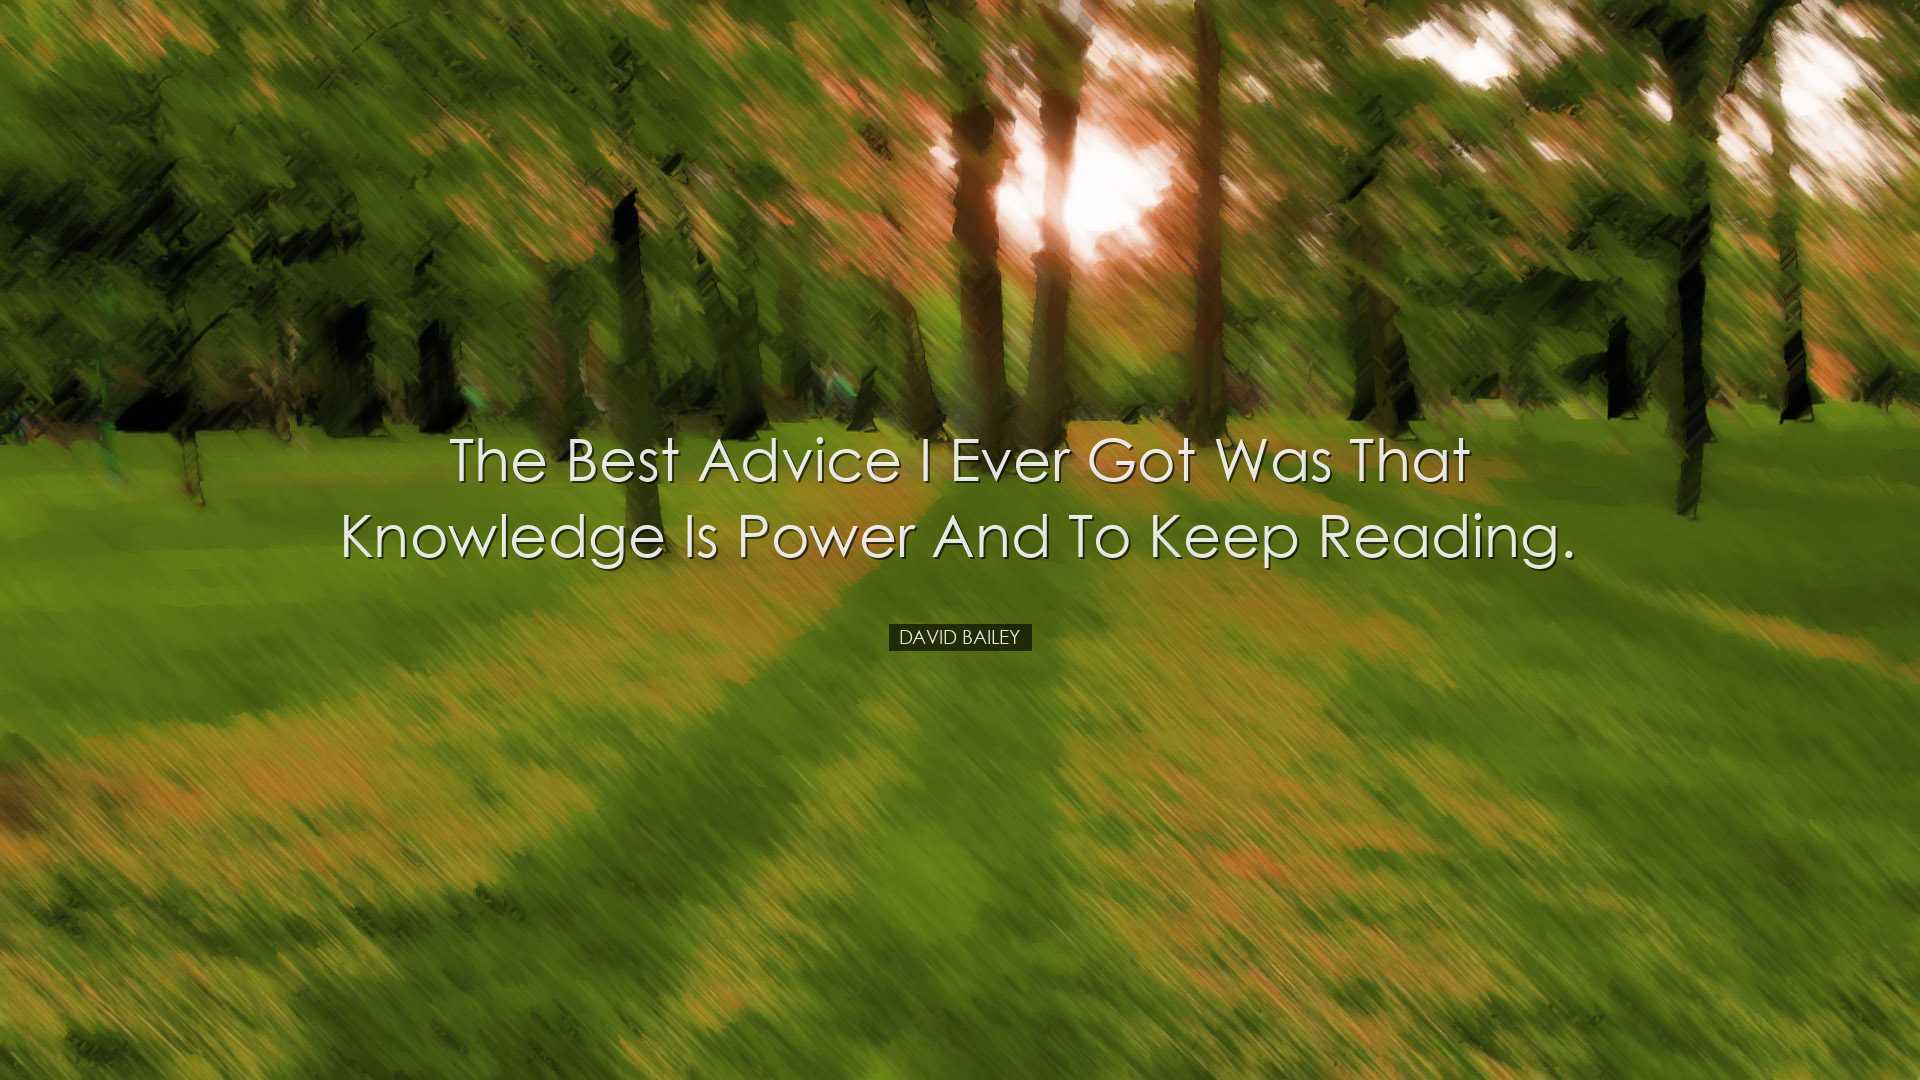 The best advice I ever got was that knowledge is power and to keep